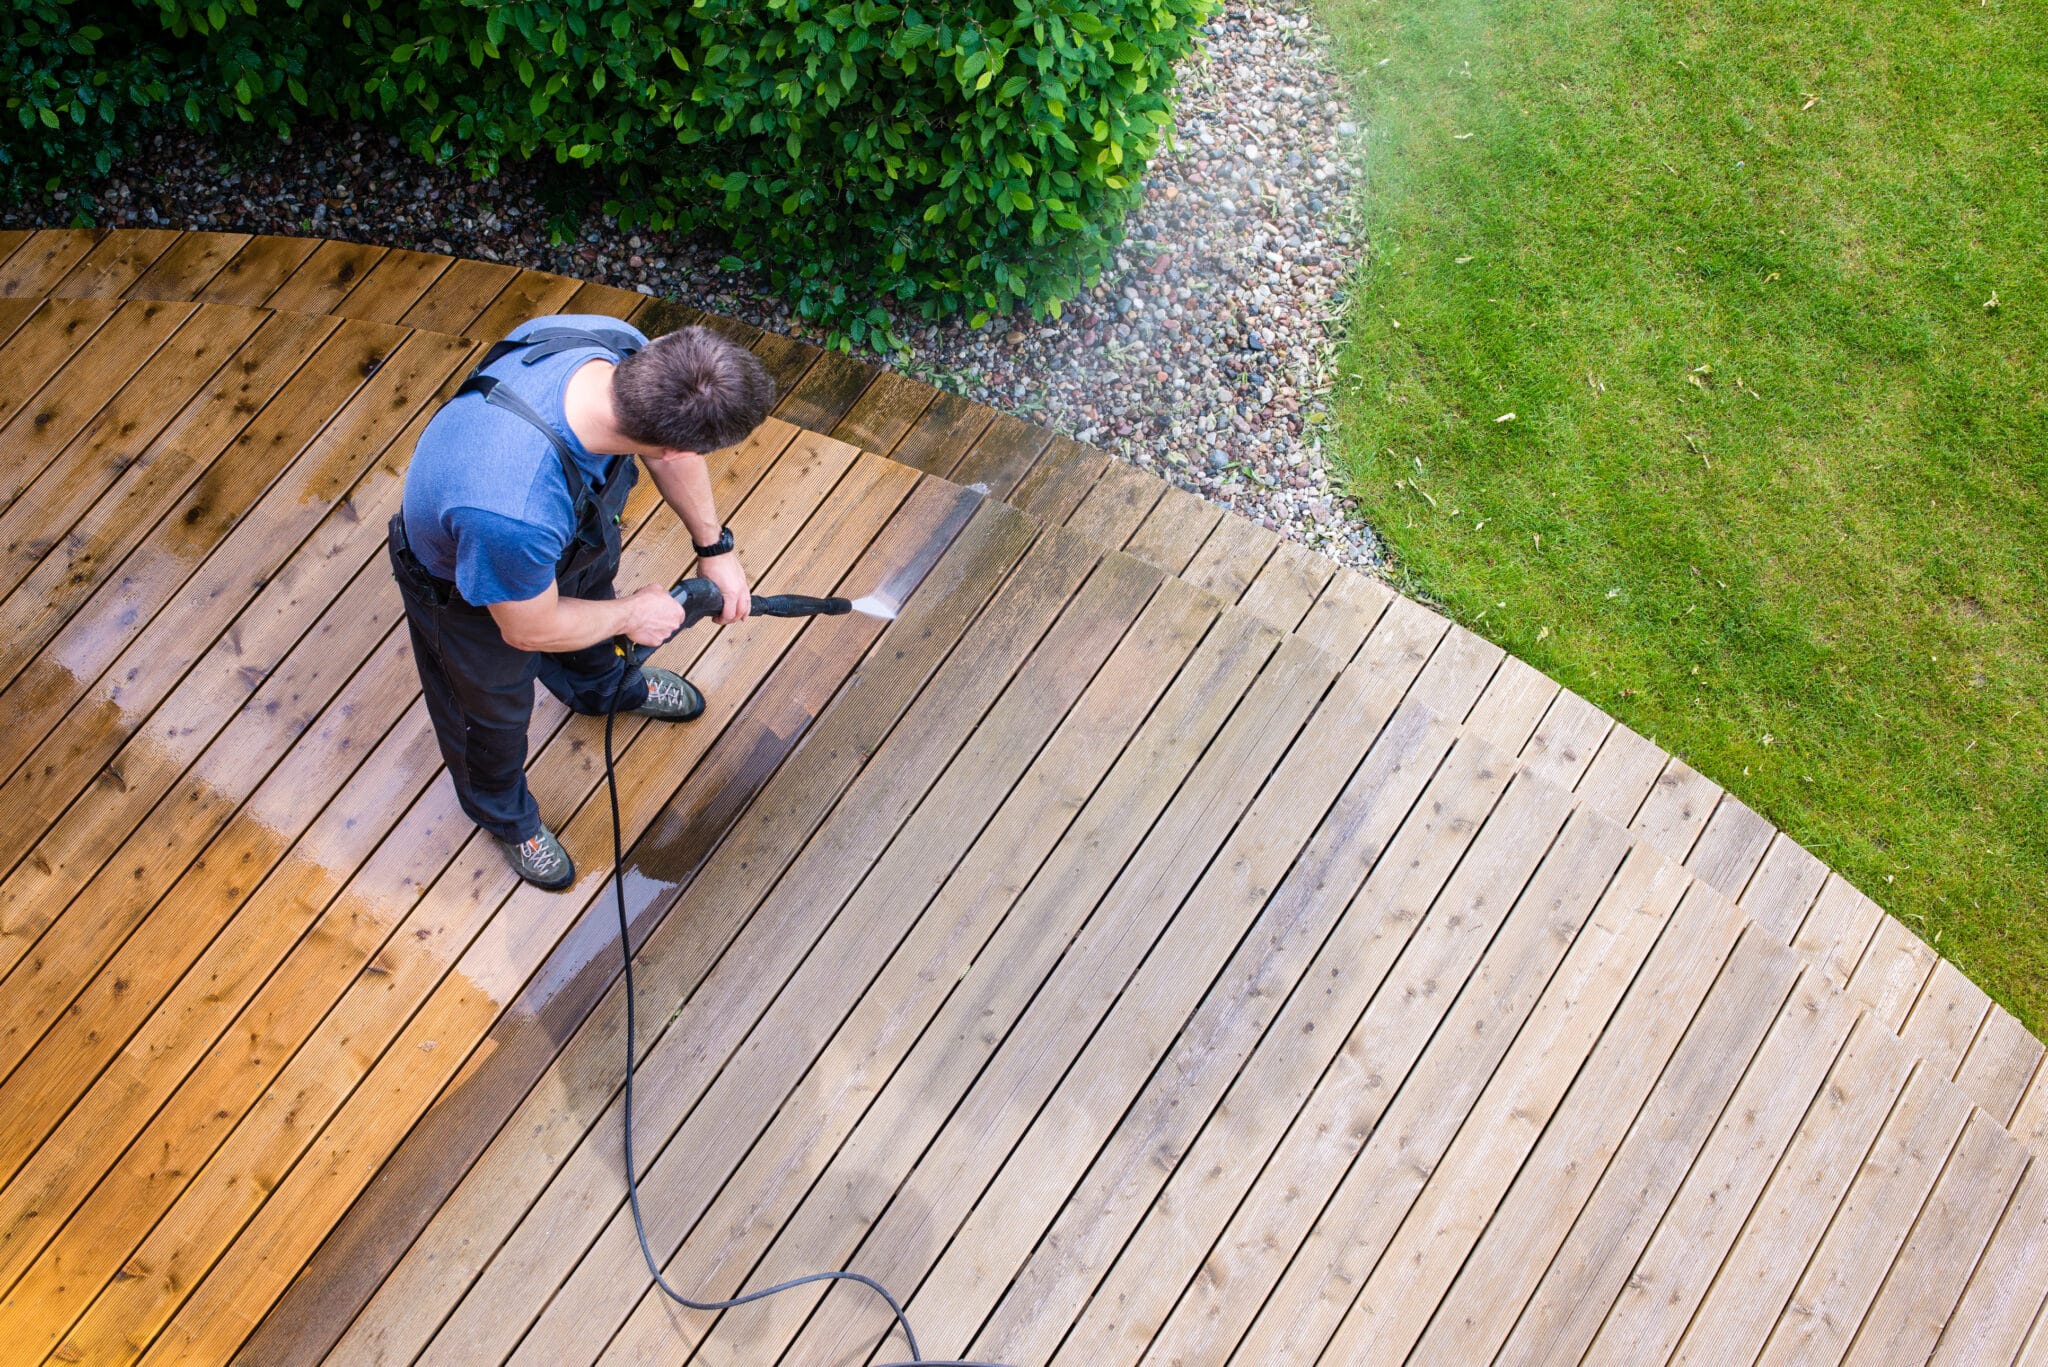 Power Washer Tips: 5 Ways To Use Your Power Washer at Home